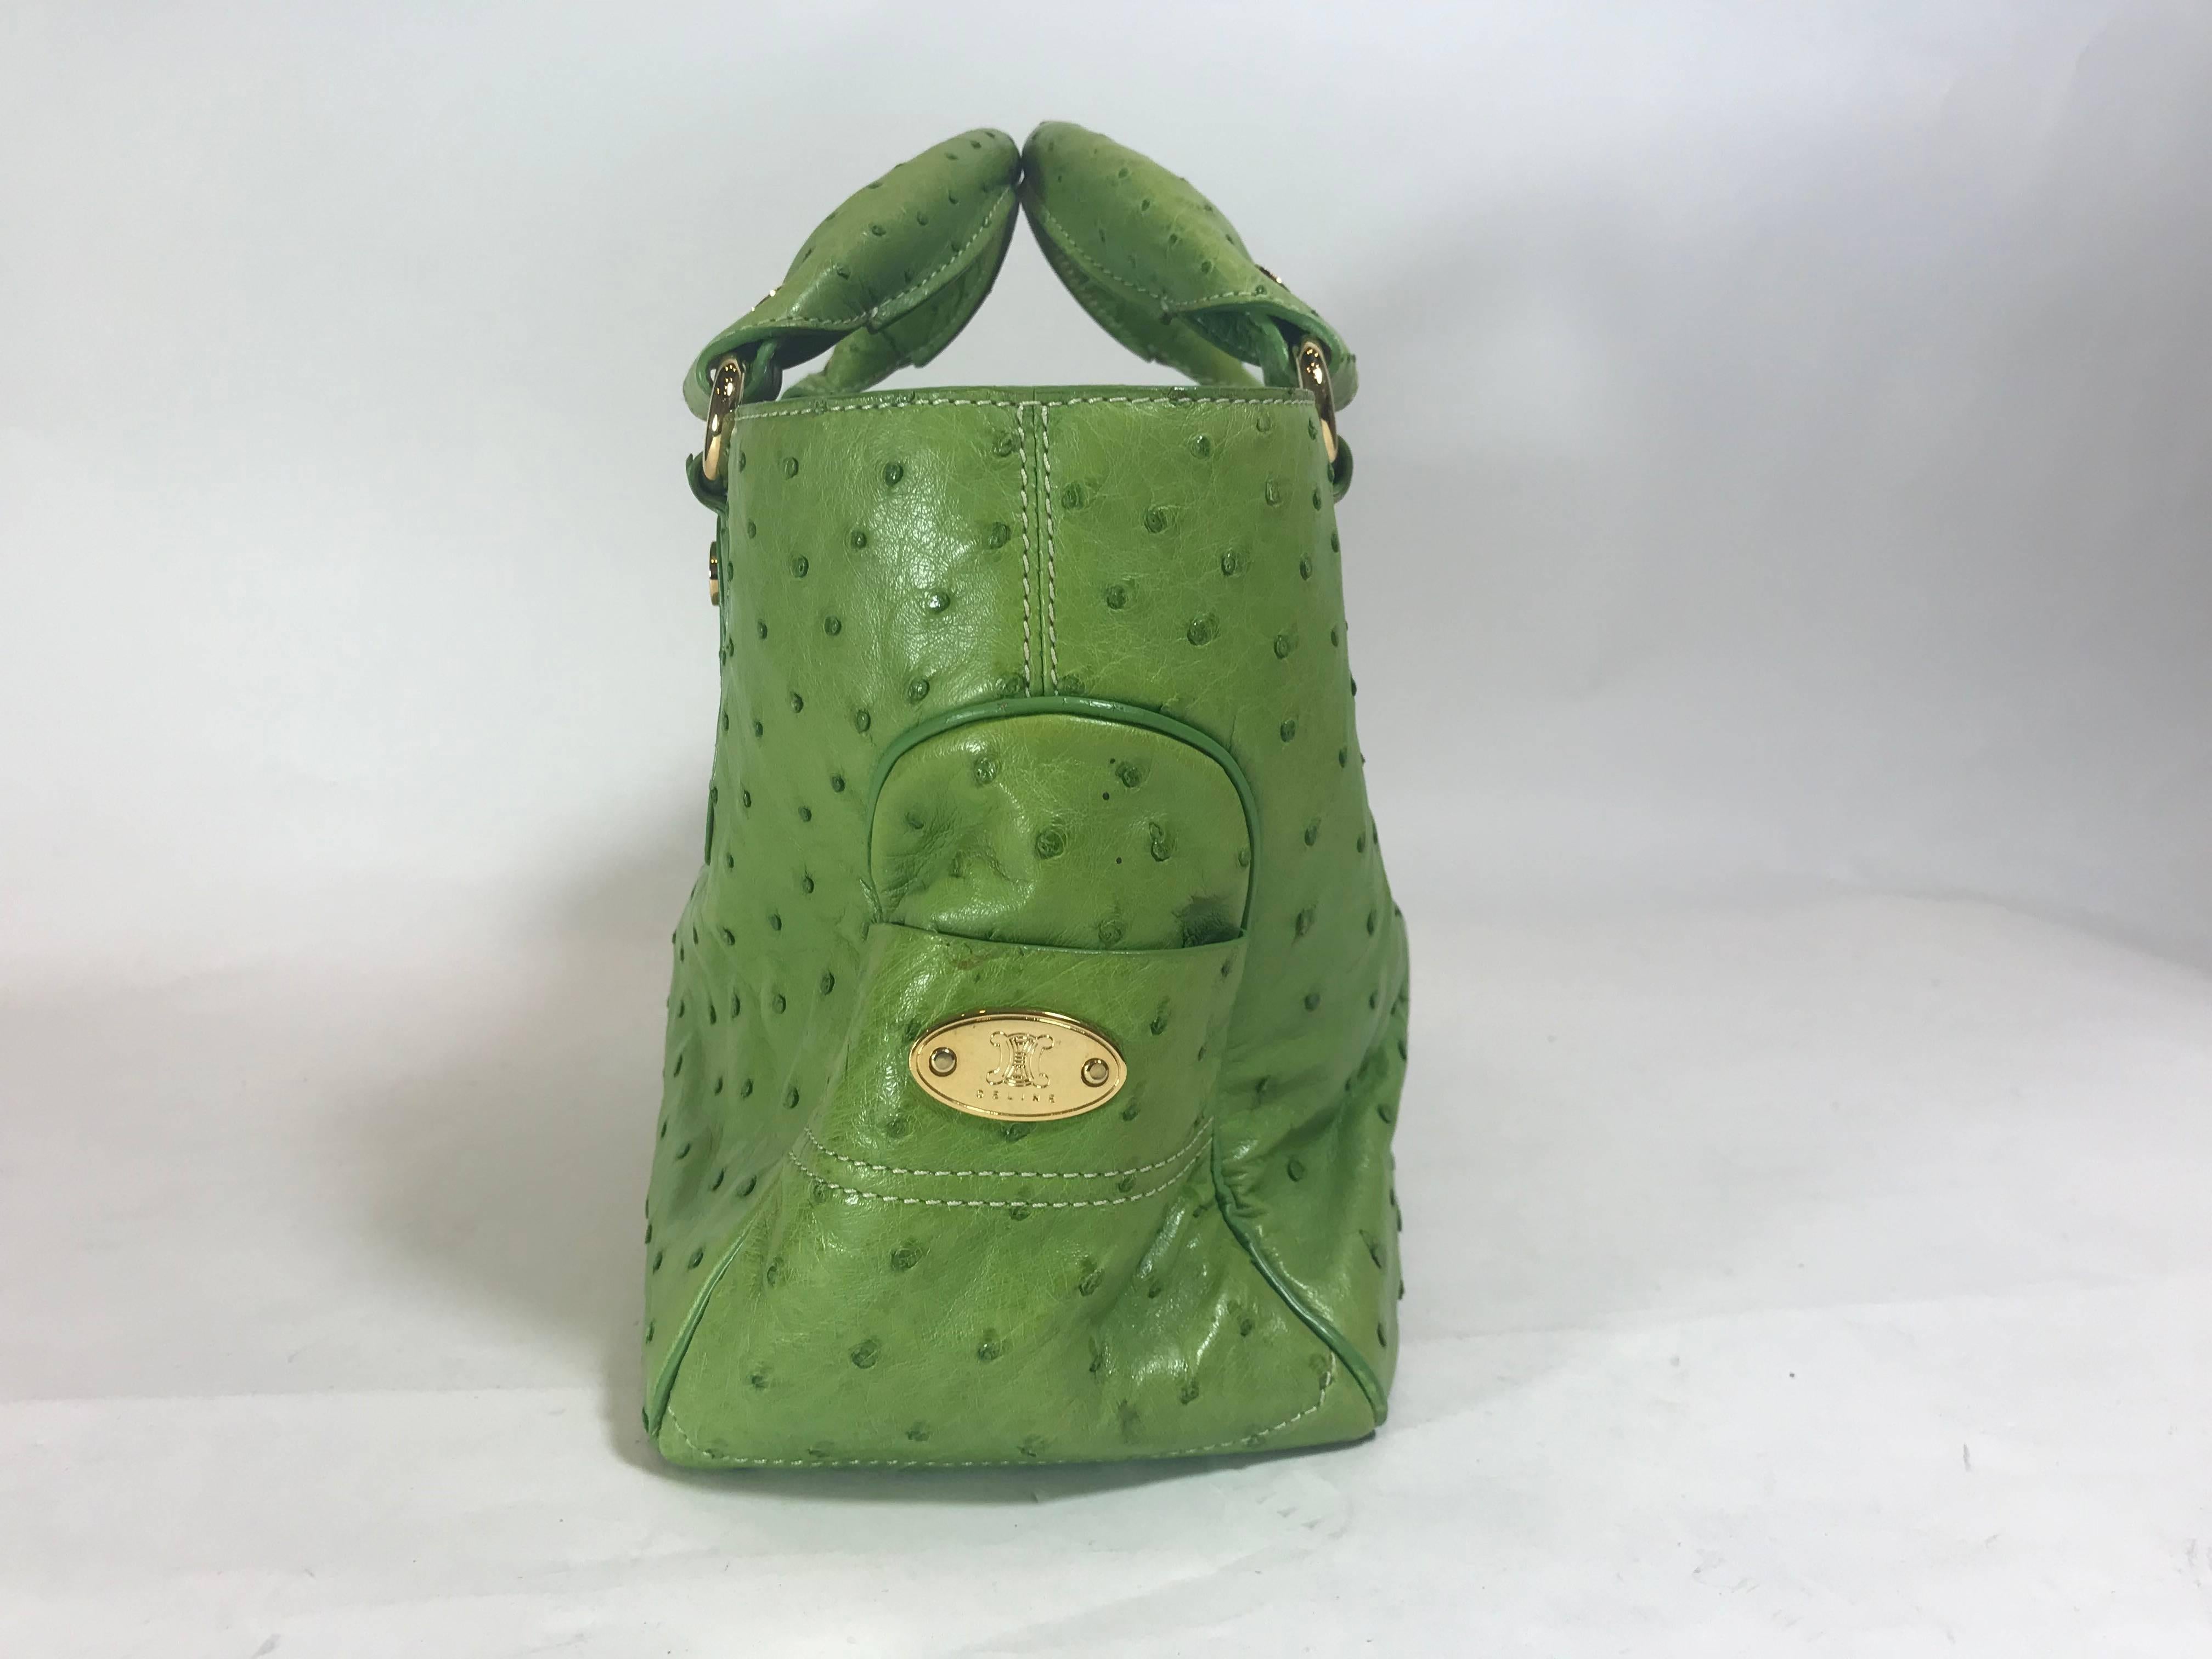 Celine always manages to make bags that are functional and stylish and this ostrich green bag fits the bill. Lined with supple emerald green interior and using fine gold hardware throughout, this bag makes us truly appreciate fine craftsmanship.